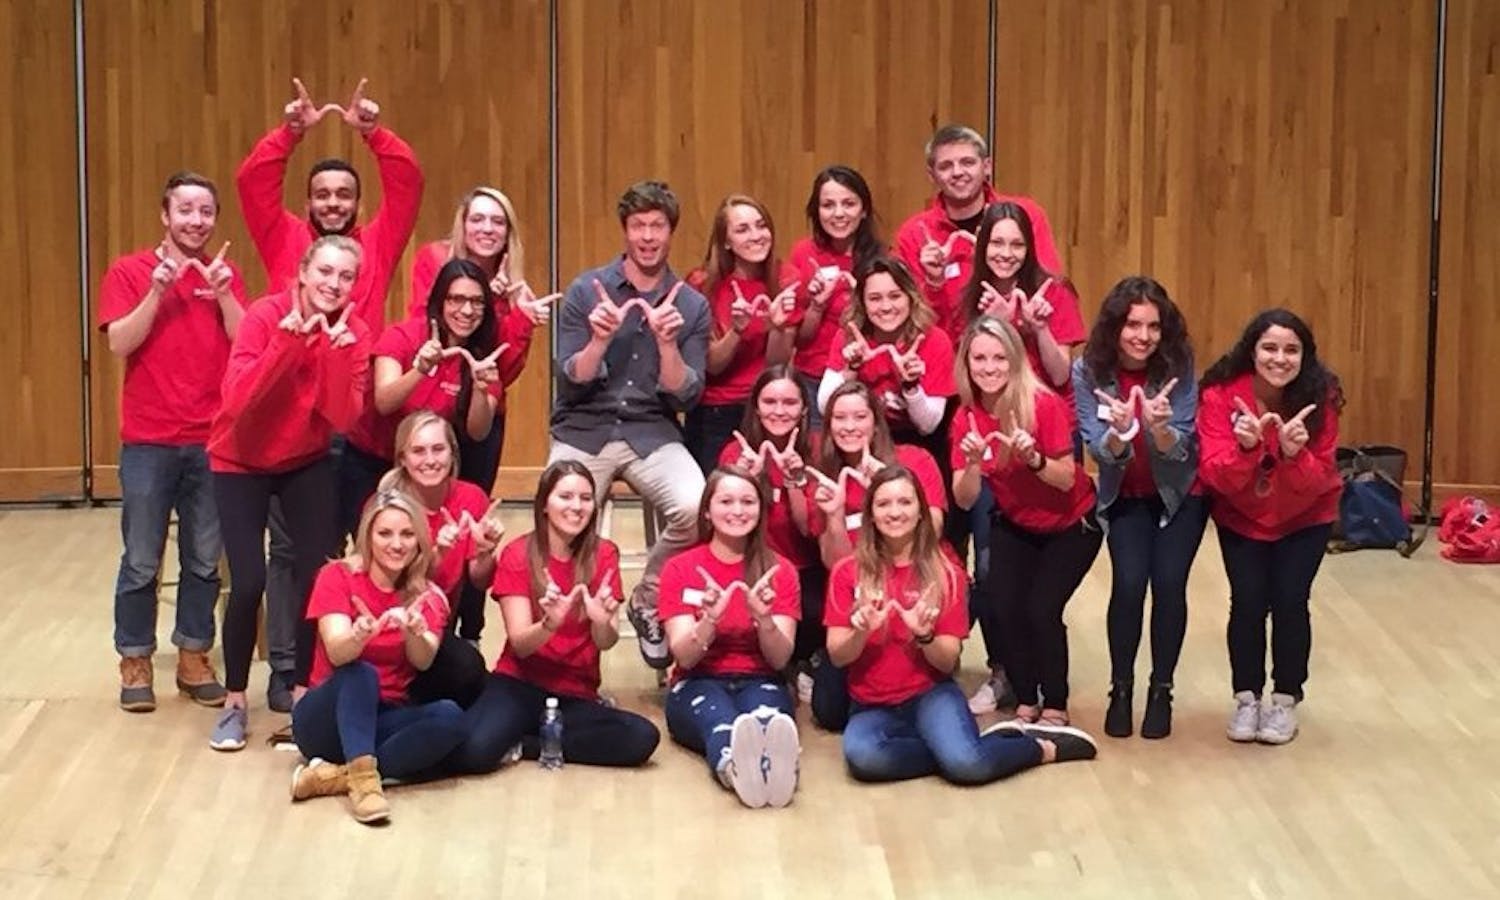 Anders Holm, a UW-Madison alumnus who stars in Comedy Central’s series, “Workaholics,” poses with members of UW-Madison Homecoming Committee after his “RED Talk” which kicked-off homecoming week.